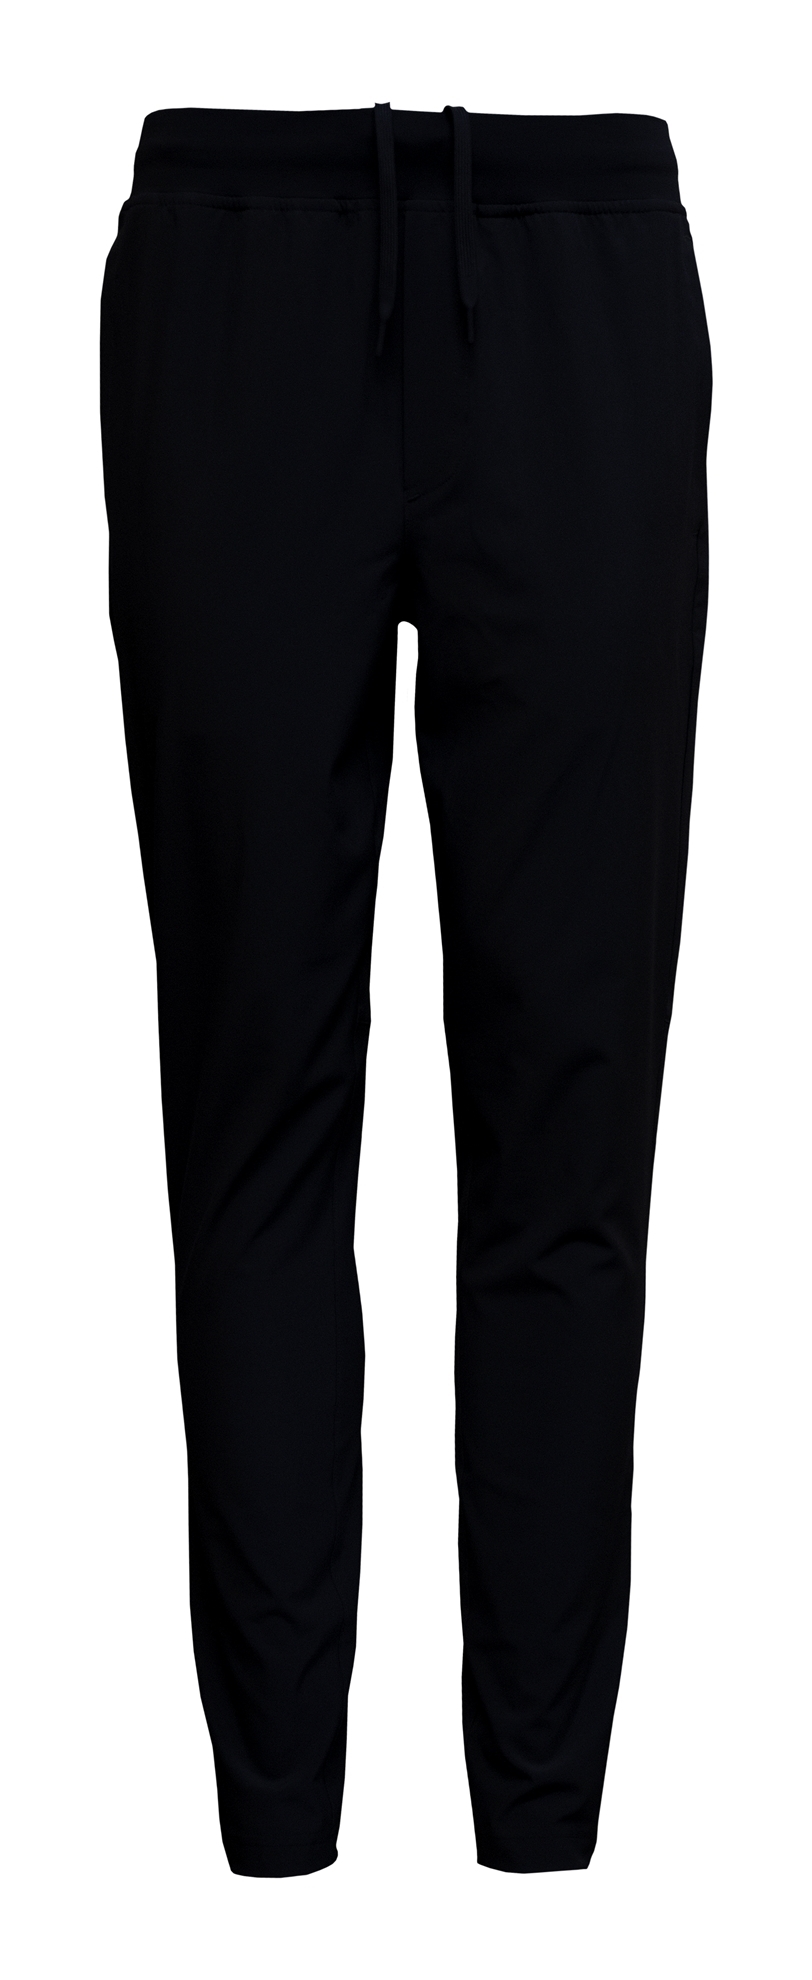 BAW Athletic Wear WP50 - Men's Woven Pant